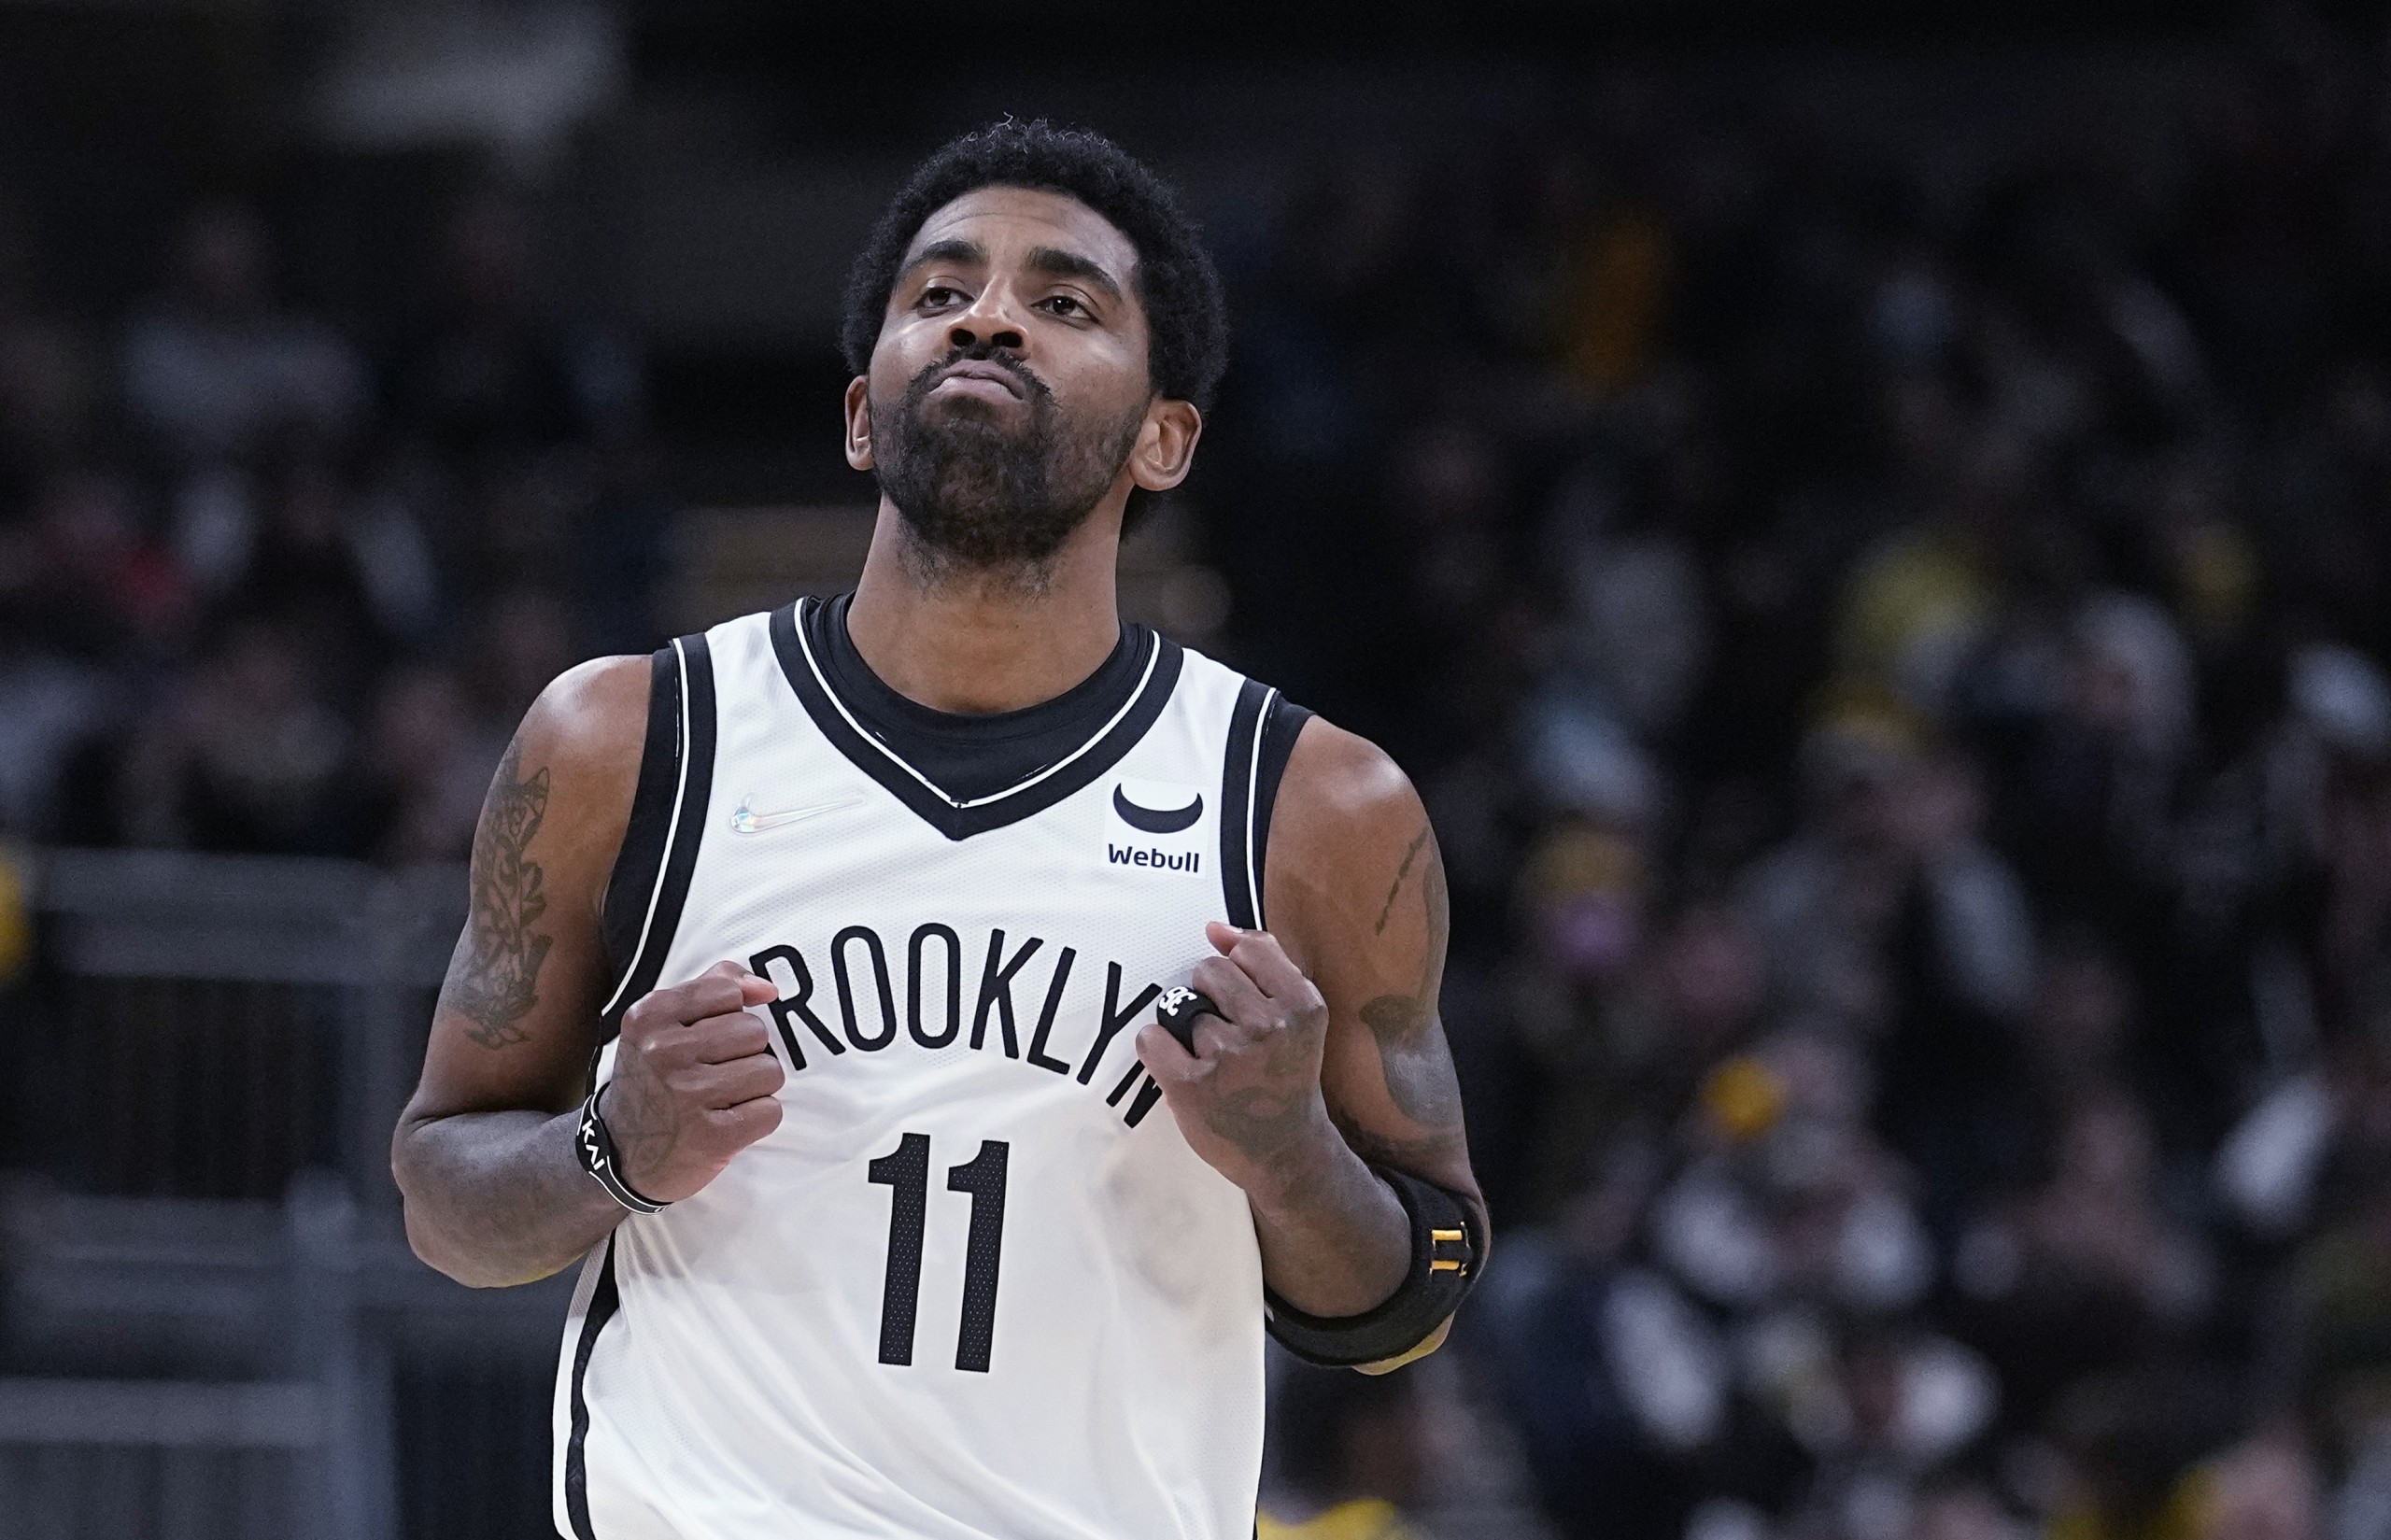 Brooklyn Nets' Kyrie Irving reacts after hitting a shot during the second half of the team's NBA basketball game against the Indiana Pacers, Wednesday, Jan. 5, 2022, in Indianapolis. (AP Photo/Darron Cummings)